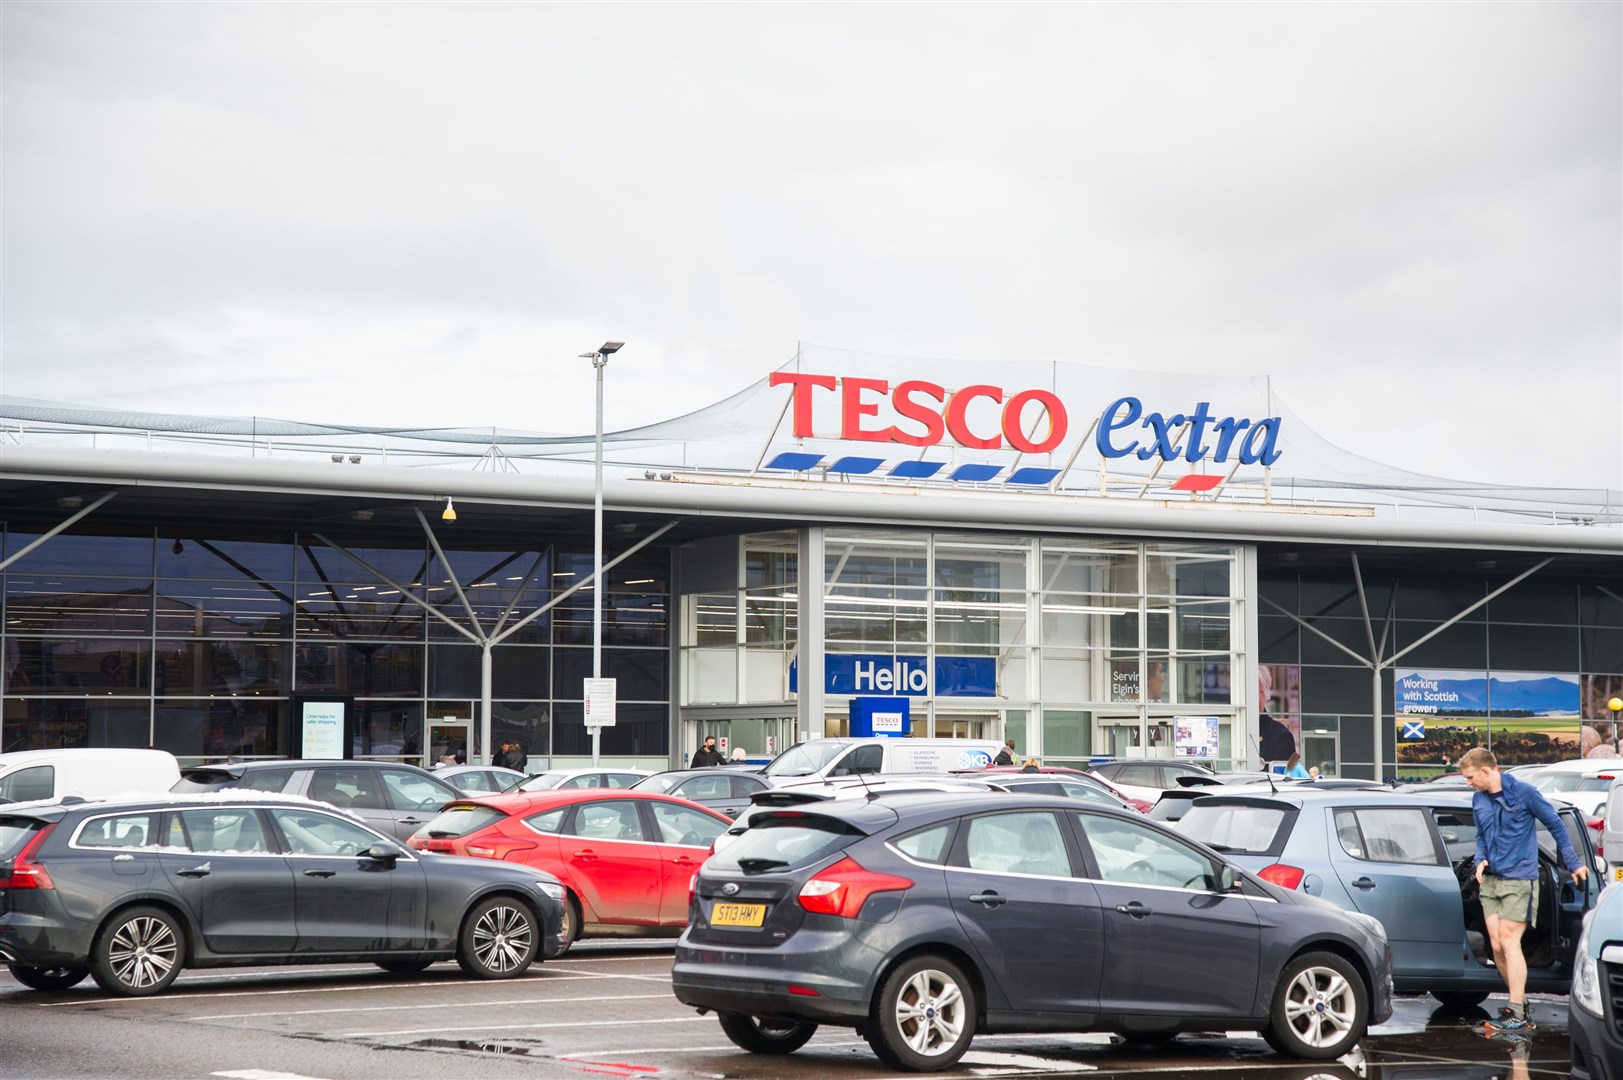 Tesco Elgin, where employees have tested positive for Covid-19.